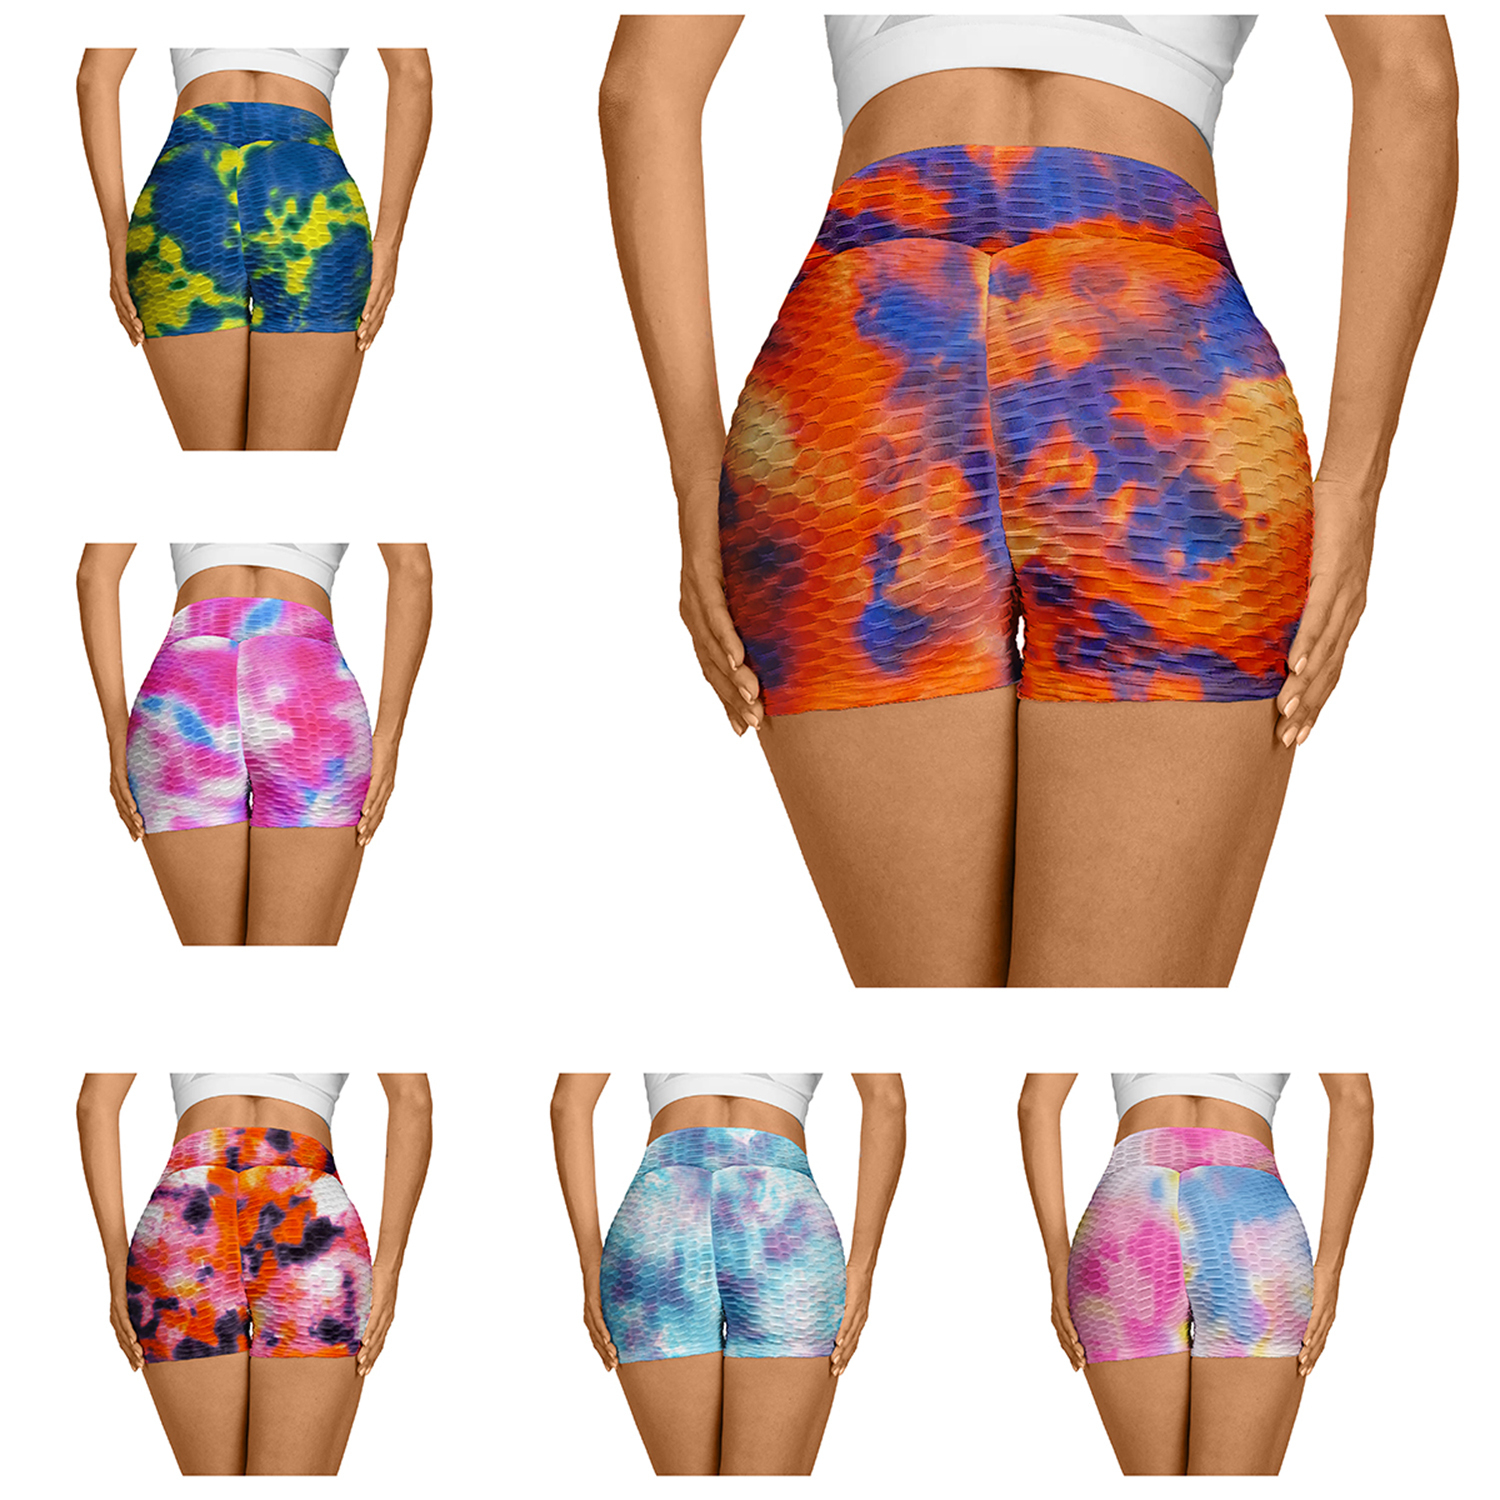 4-Pack Women's High Waisted Anti-Cellulite Tie-dye Workout Biker Shorts - Large/X-Large